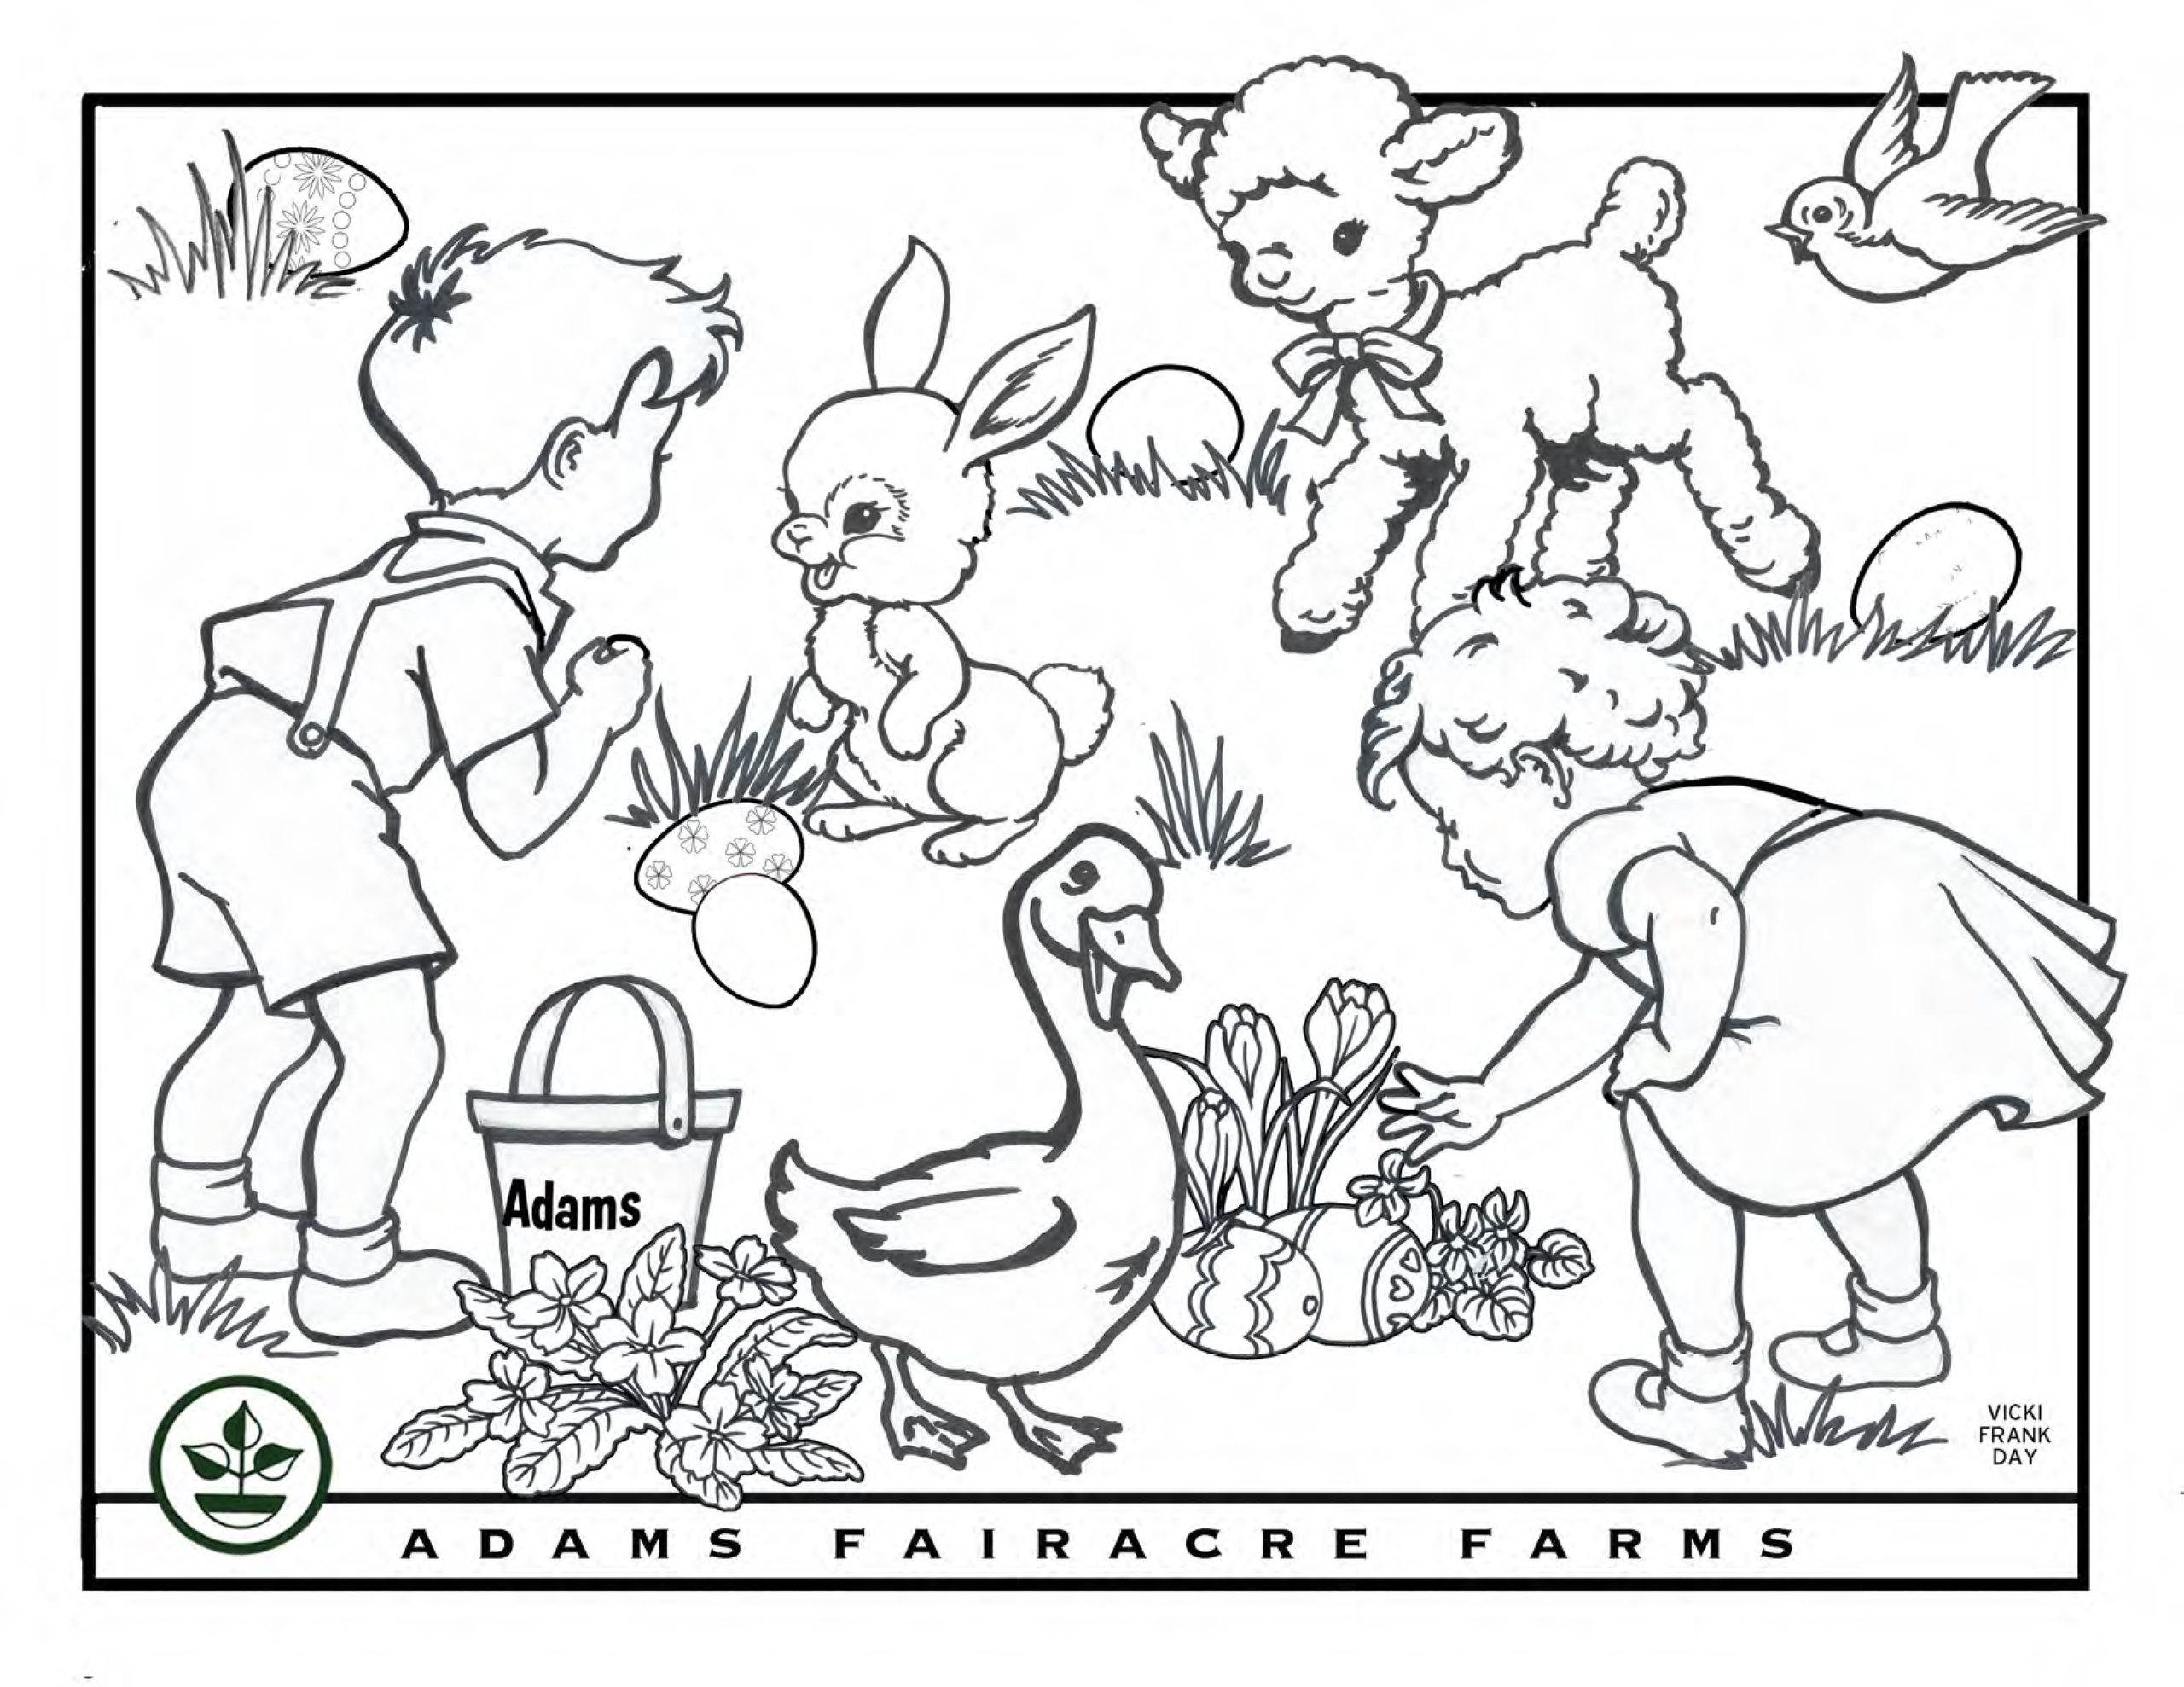 Easter Coloring Pages | Adams Fairacre Farms